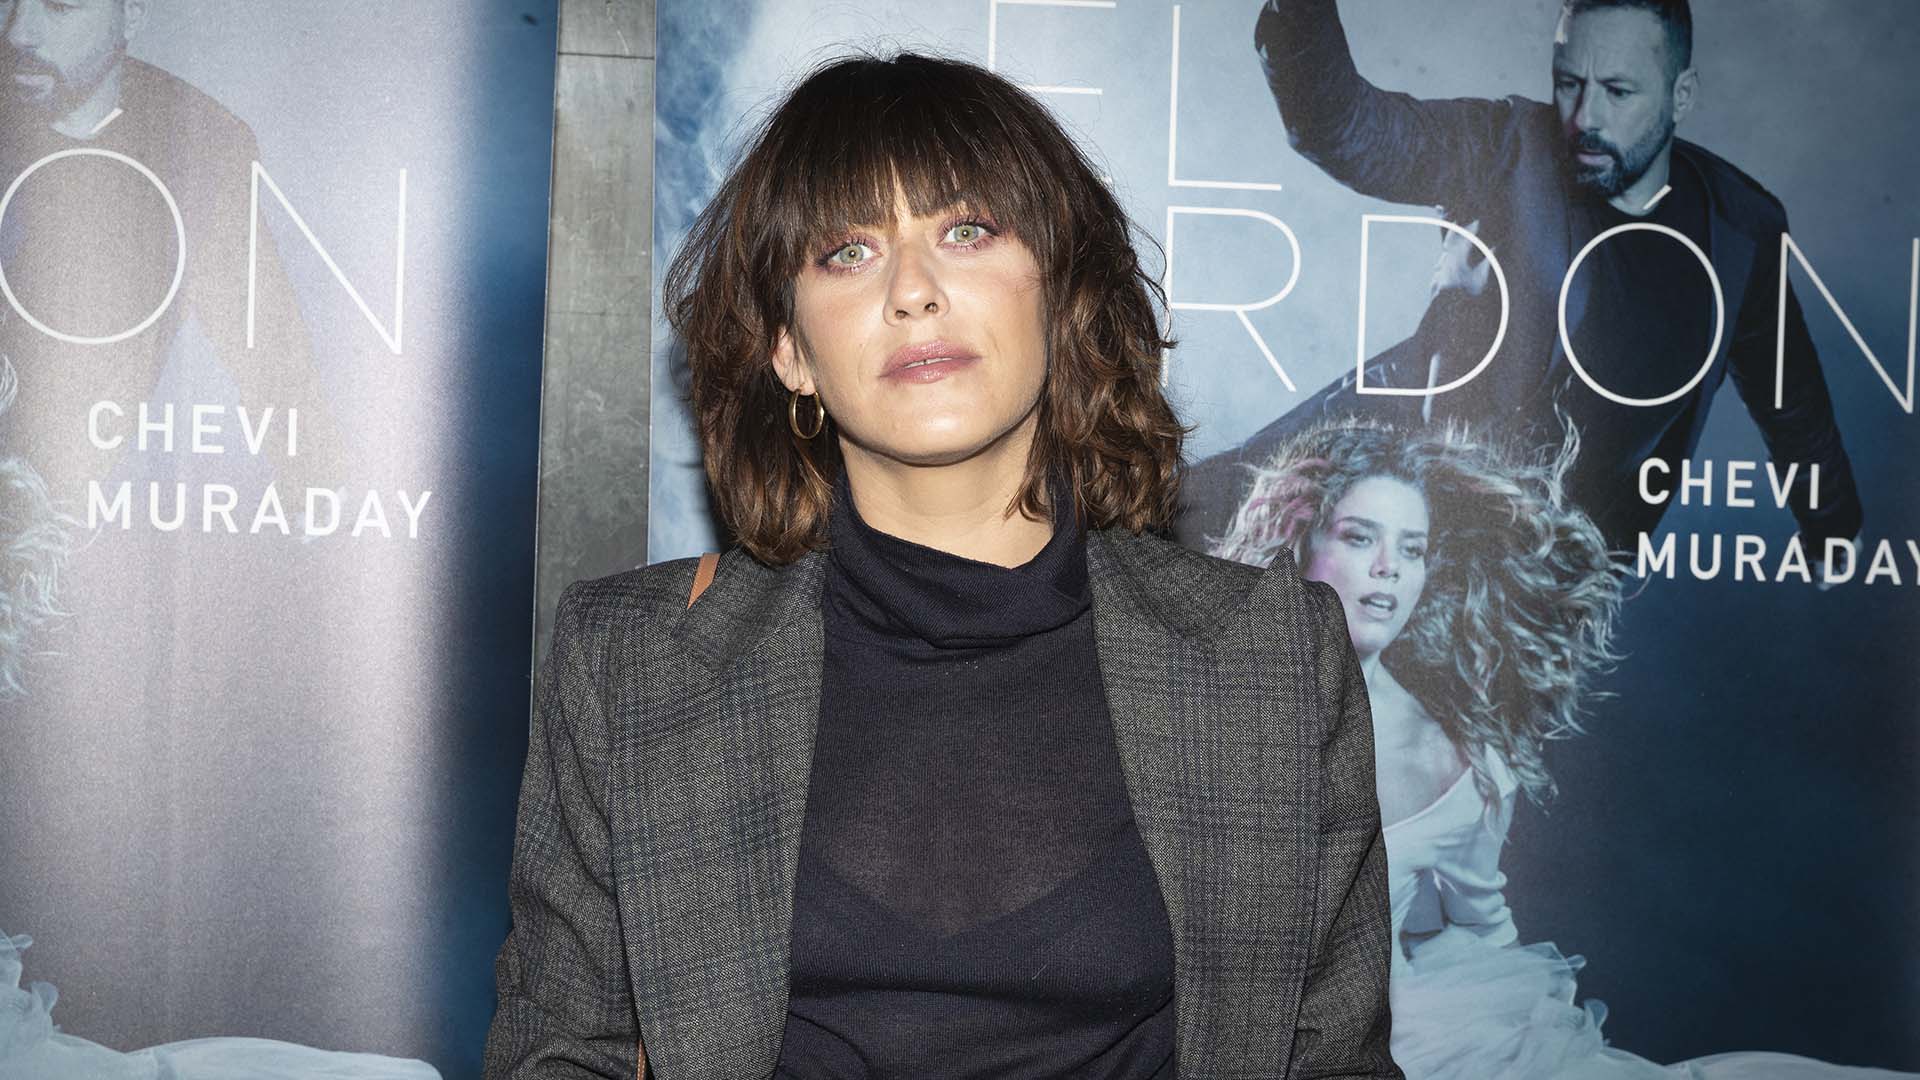 Actress Maria Leon at photocall for premiere show El Perdon in Madrid on Thursday, 13 January 2022.